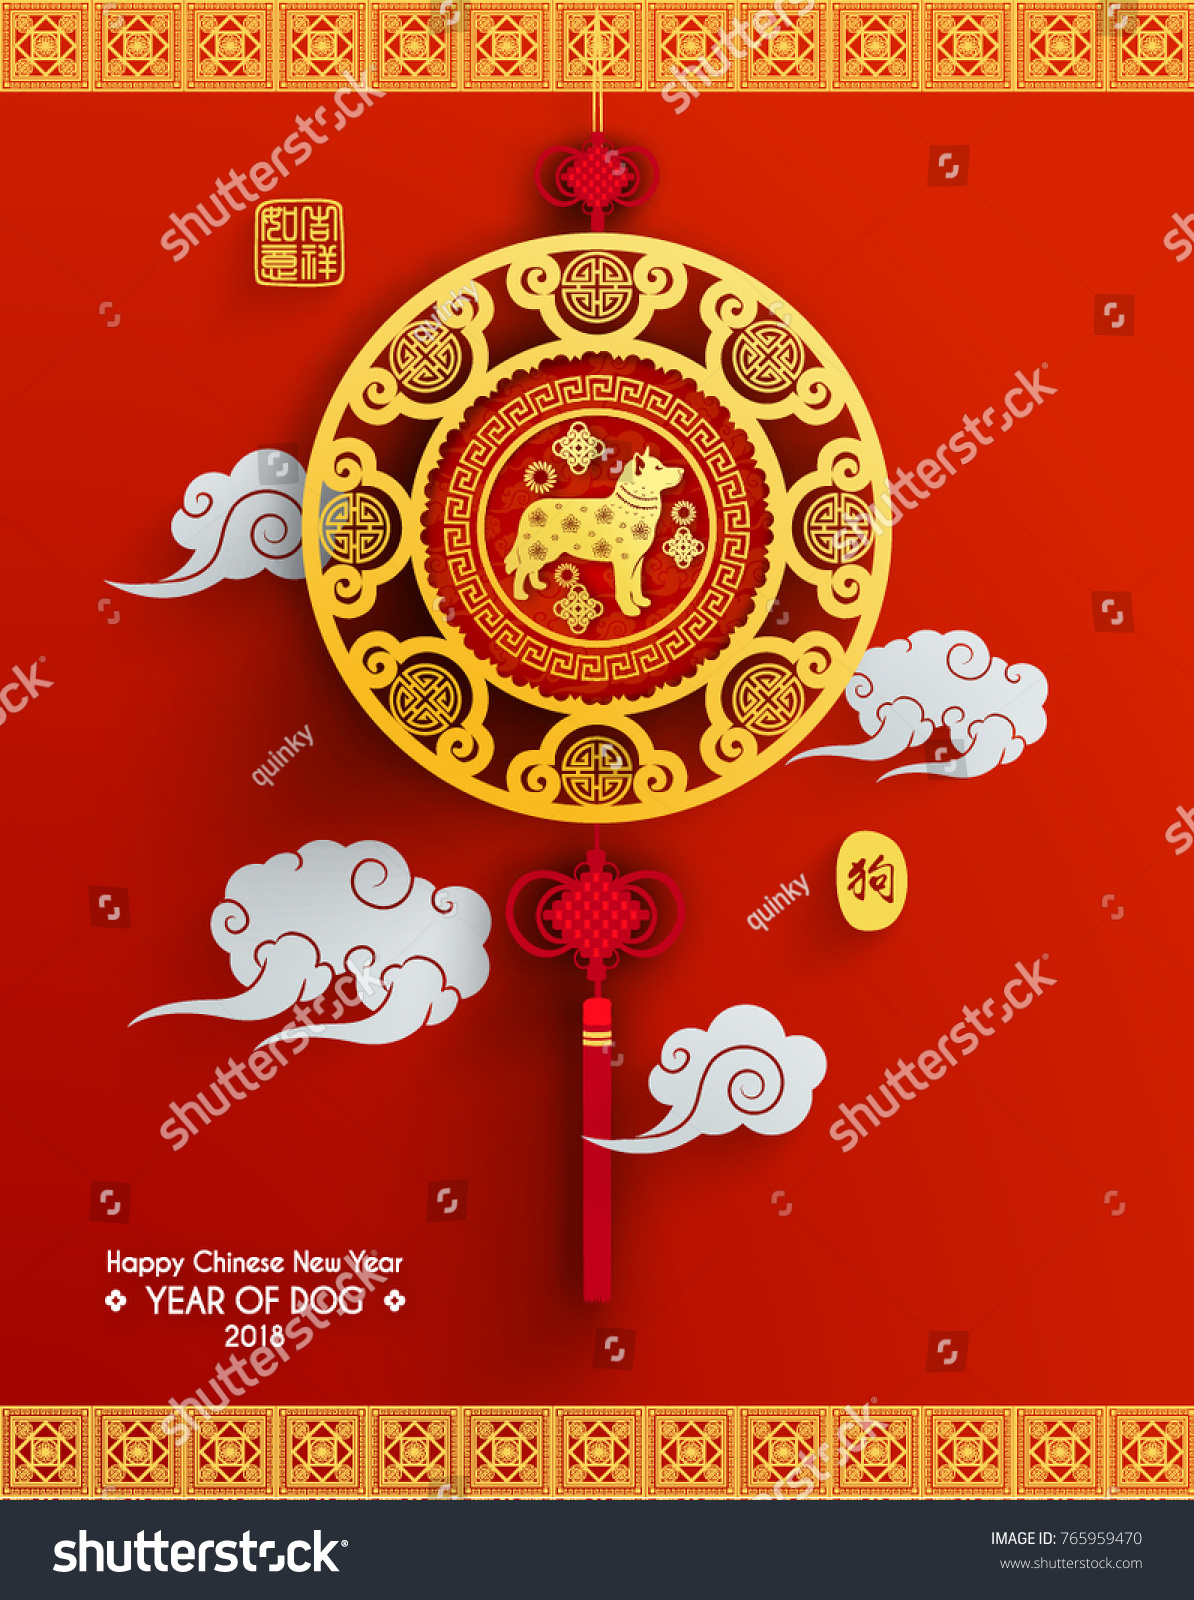 Happy Chinese New Year 2018 Vector Stock Vector Royalty Free